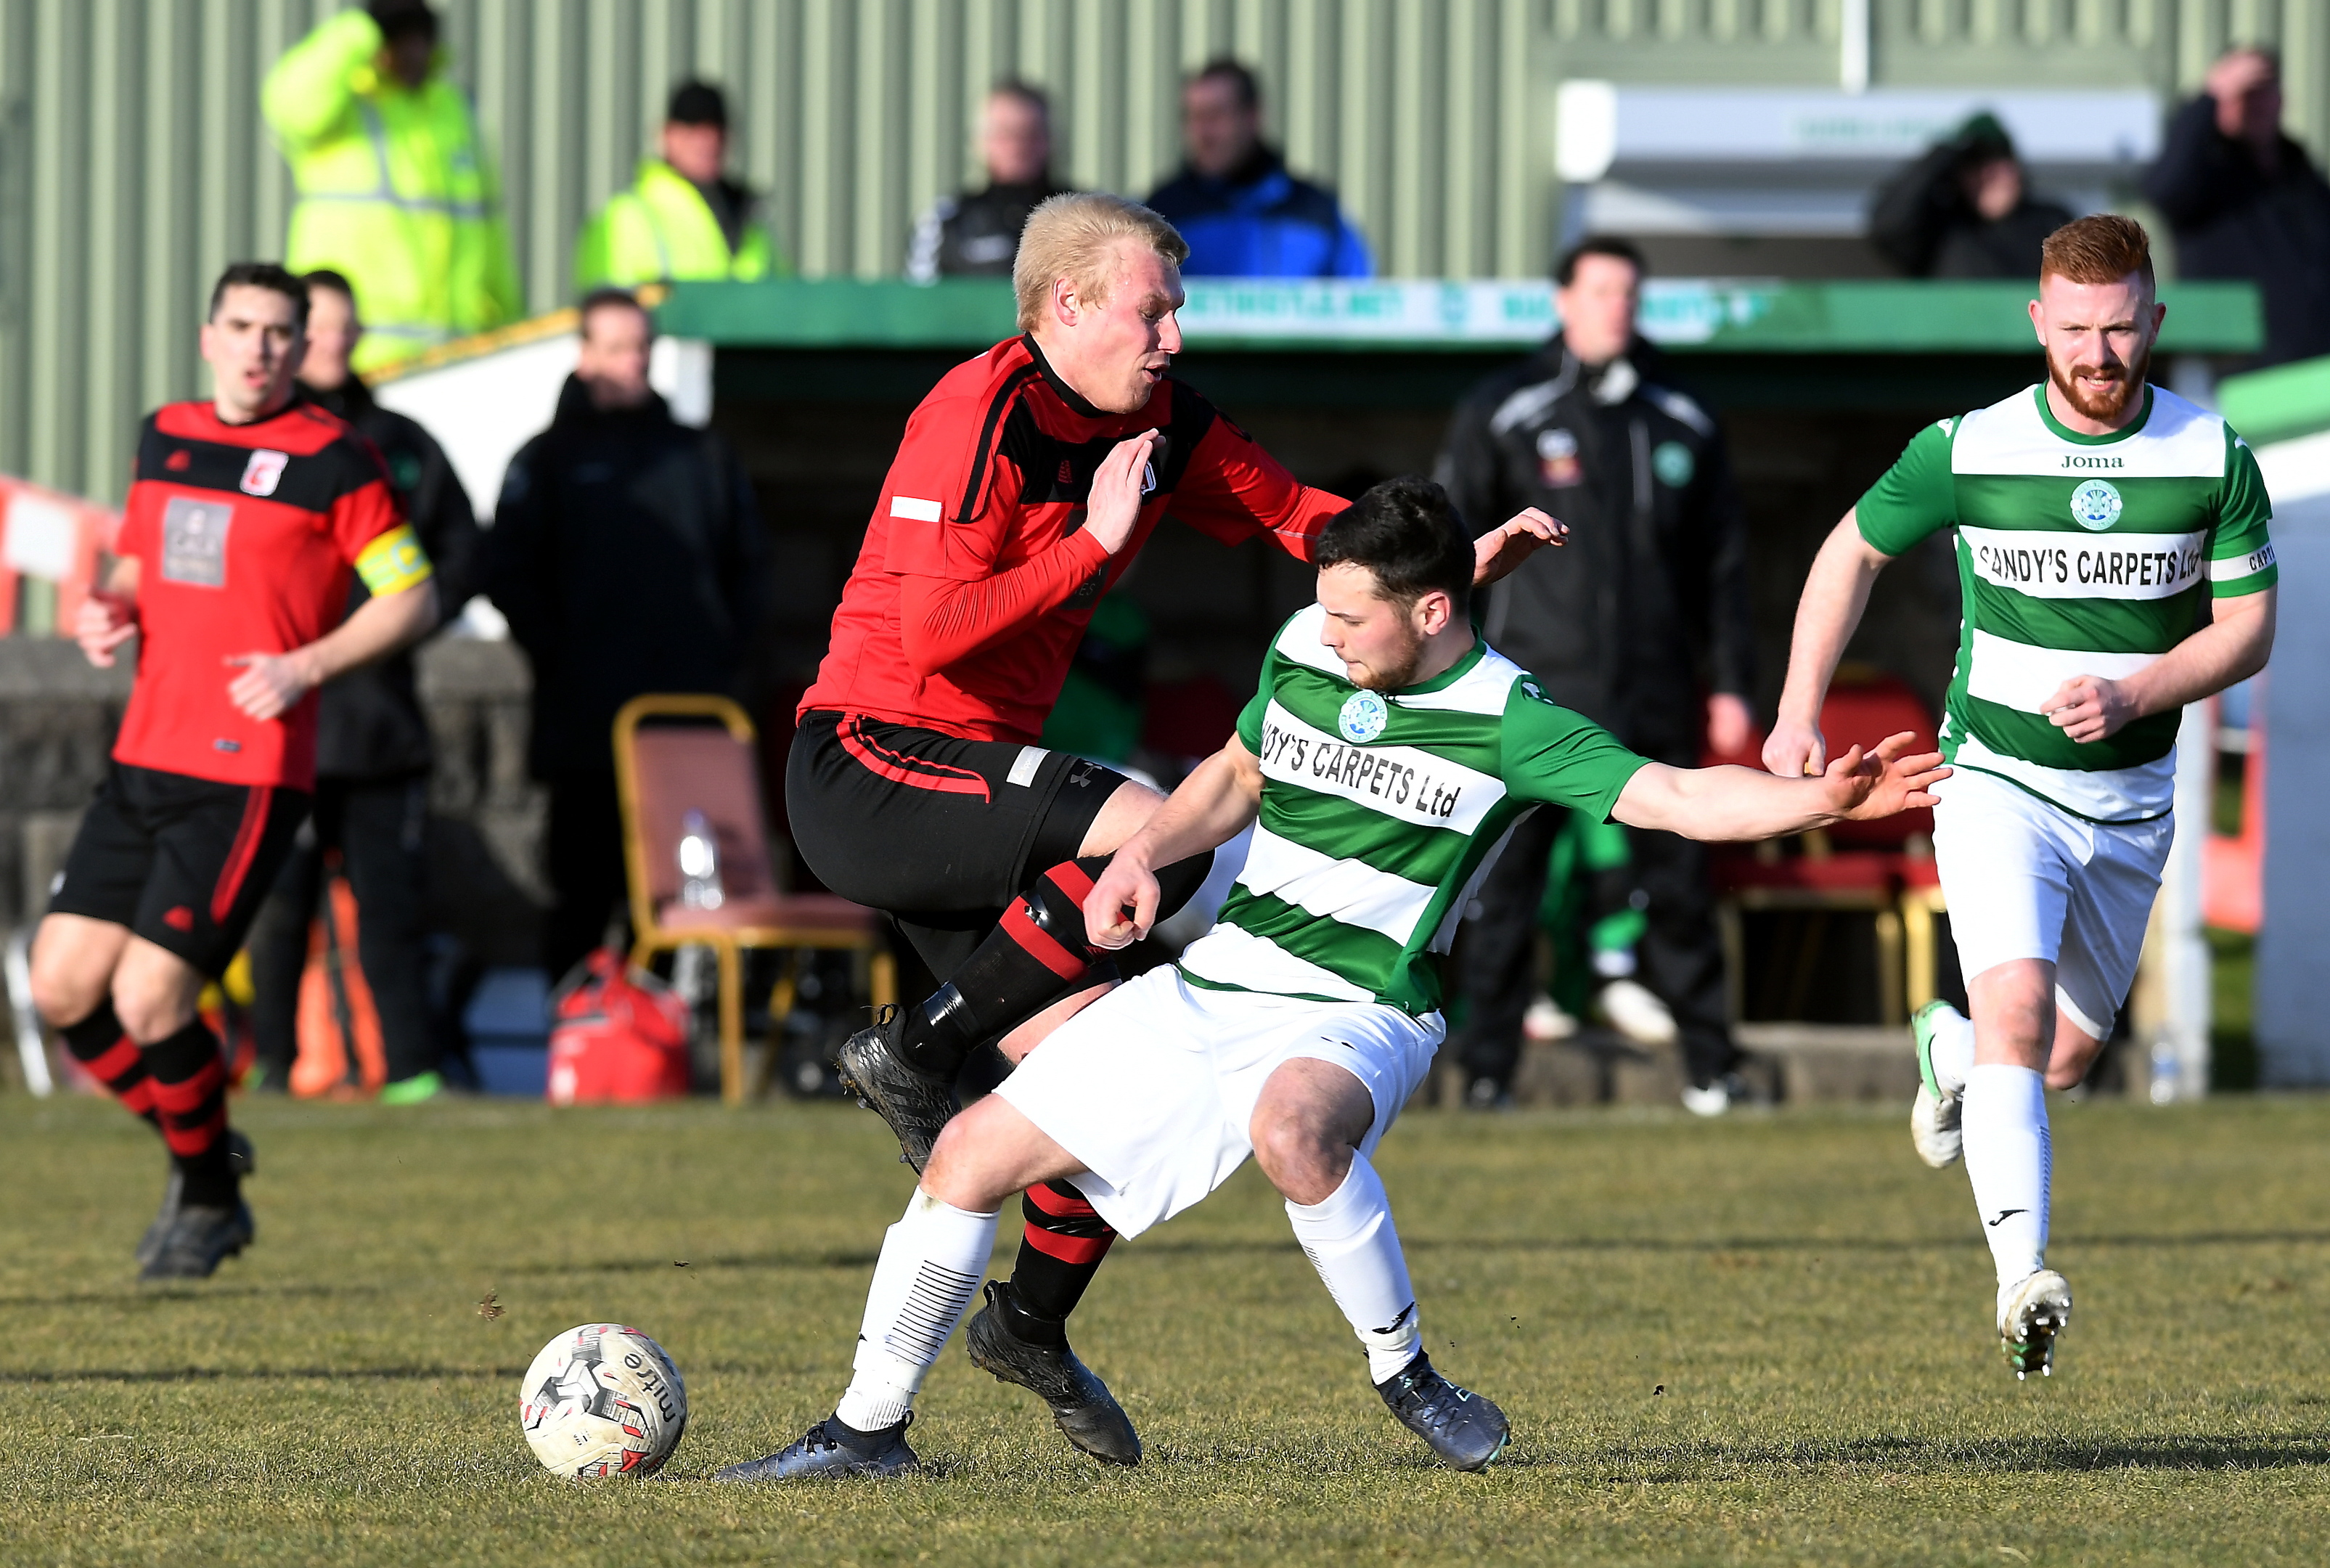 Loco's Chris Angus and Buckie's Andrew Skinner in action.